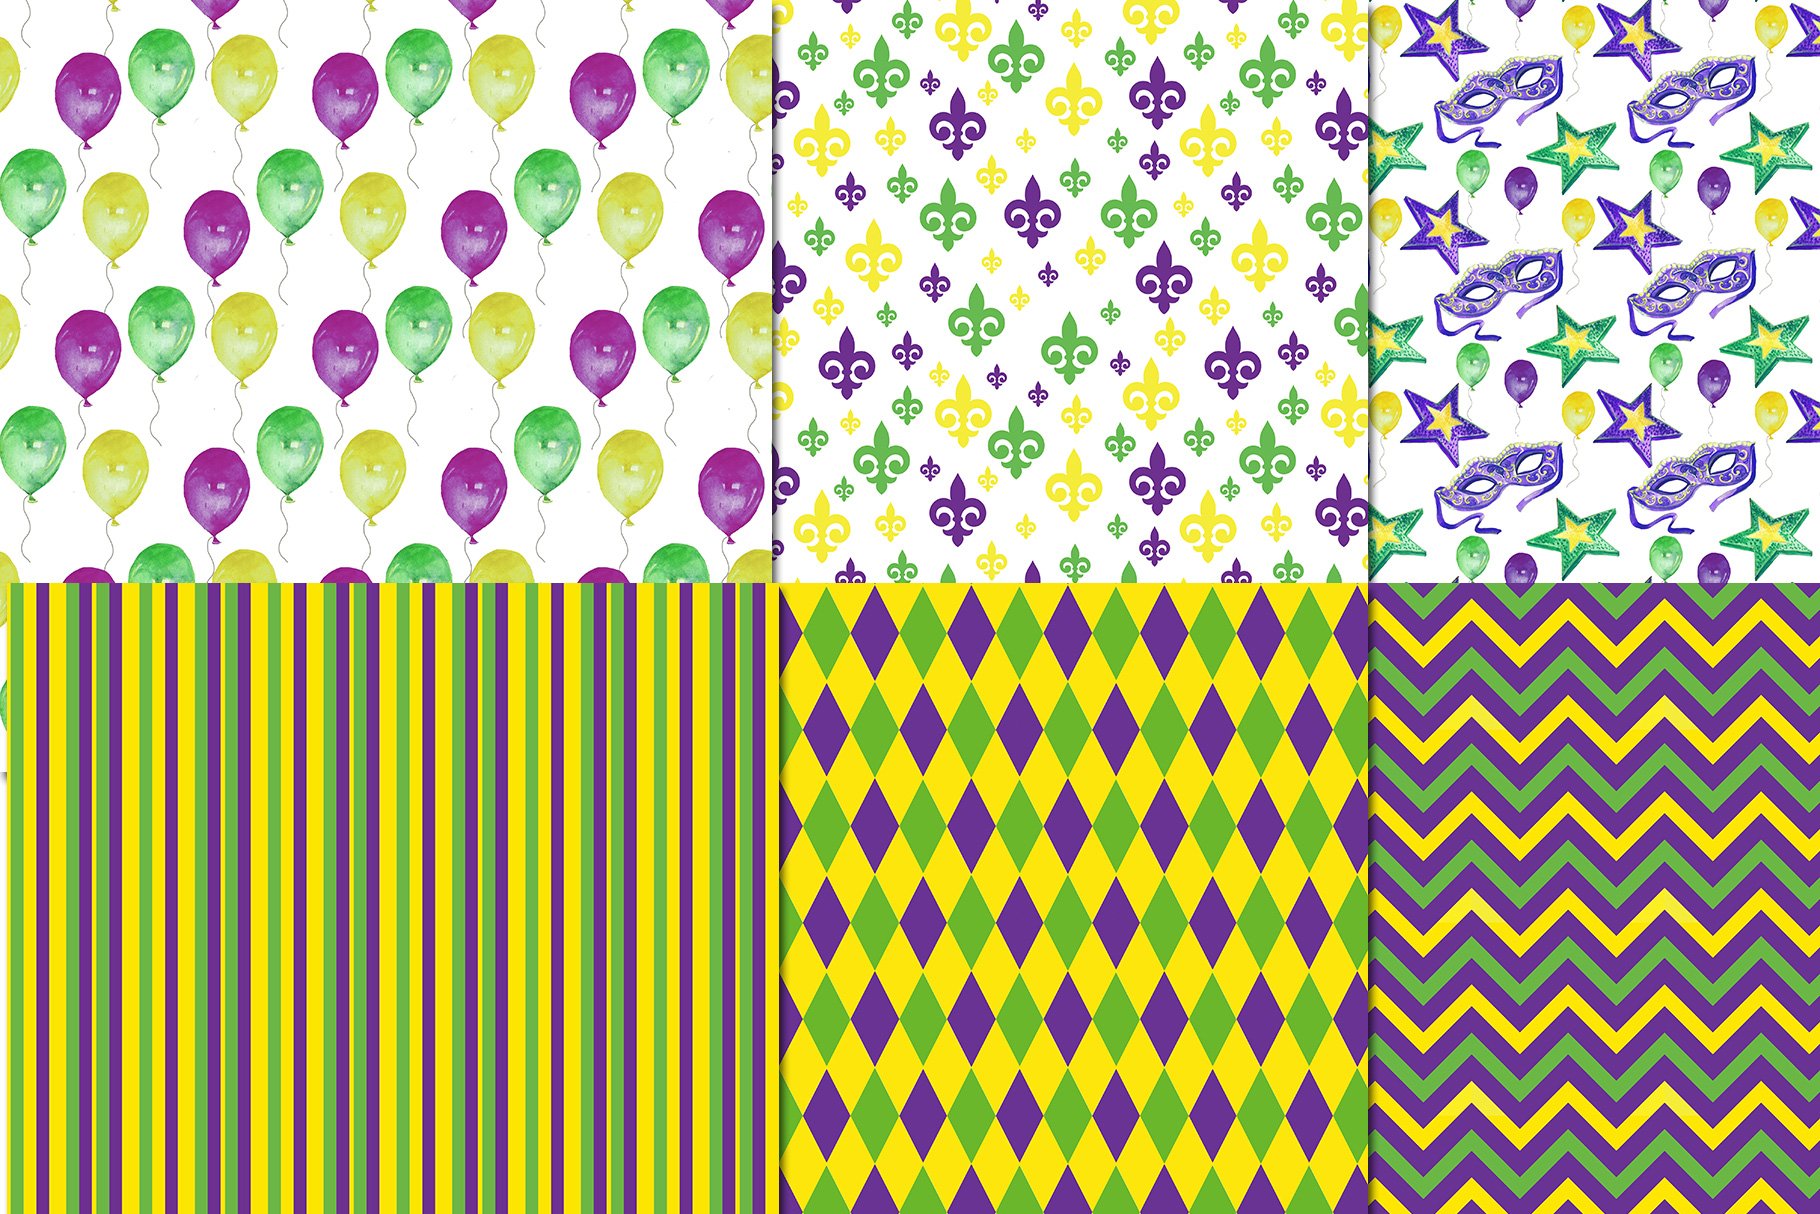 Patterns with colorful lines and other prints.